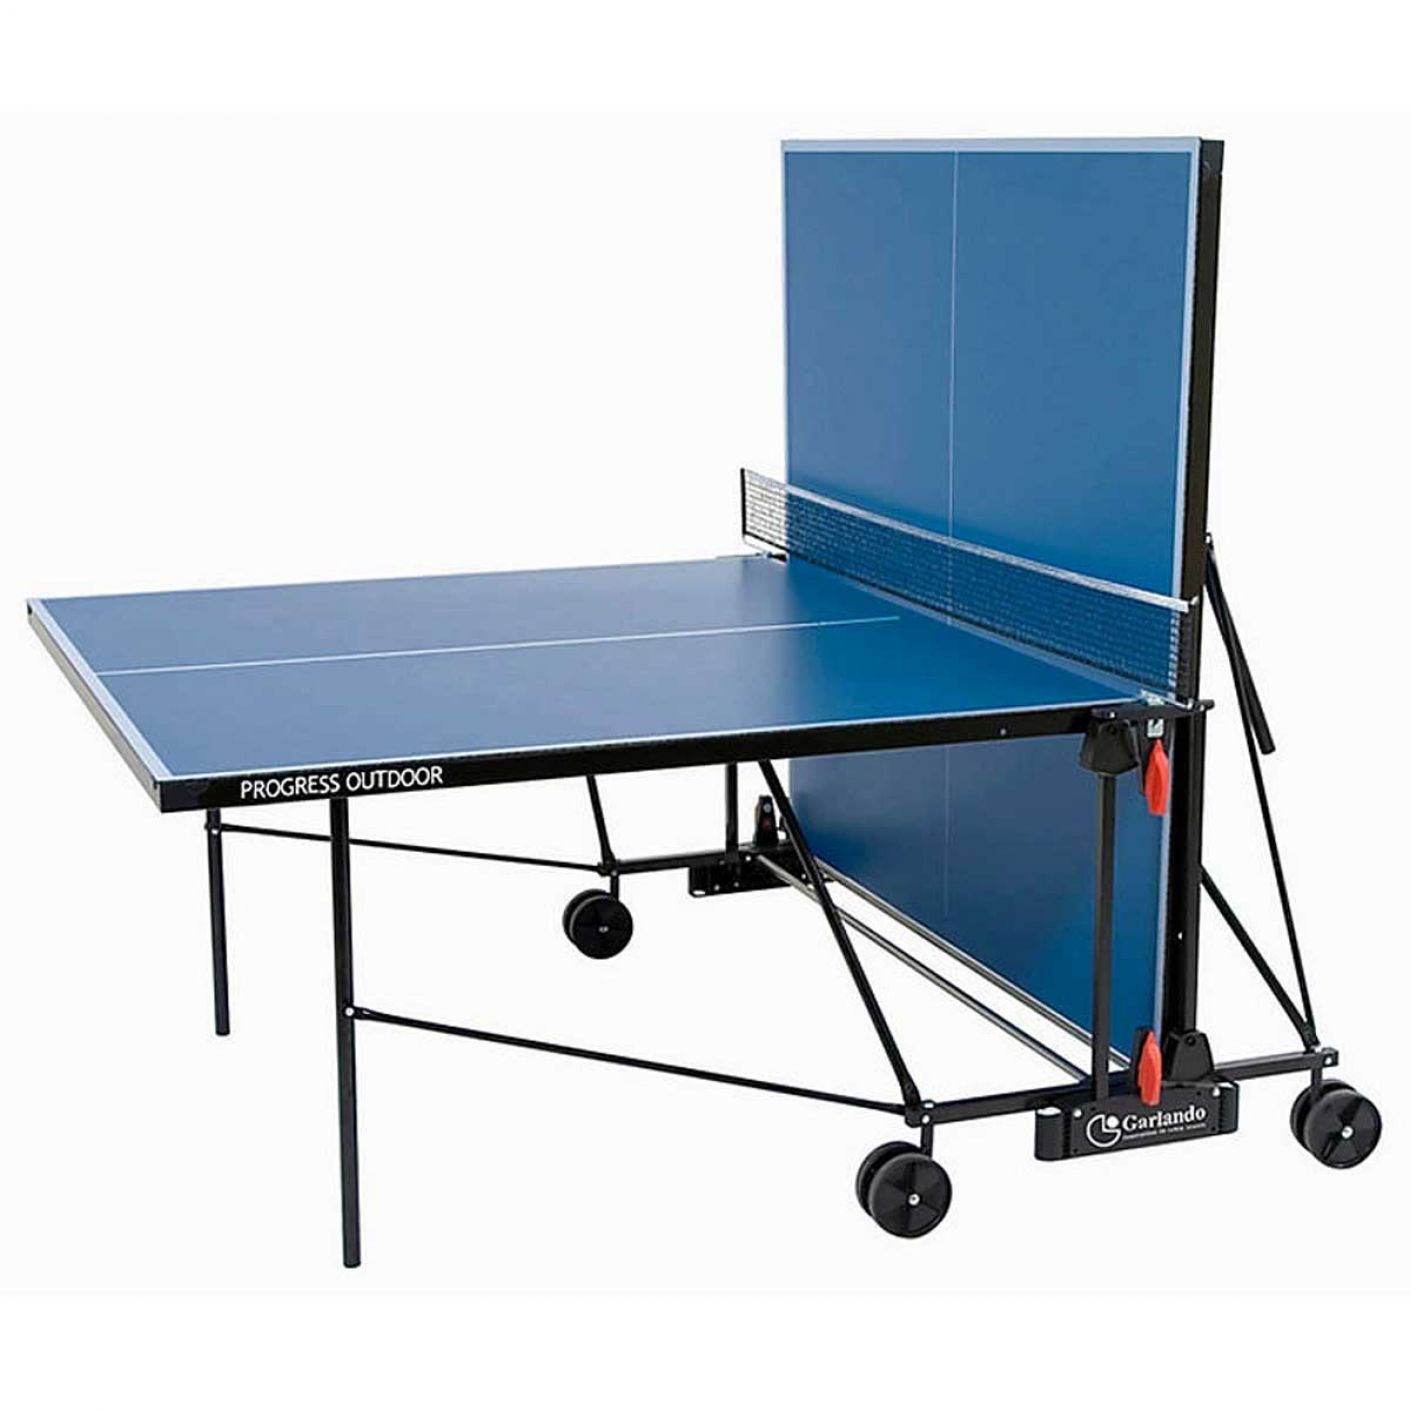 Garlando Ping Pong Table Progress Outdoor Blue with wheels for outdoor